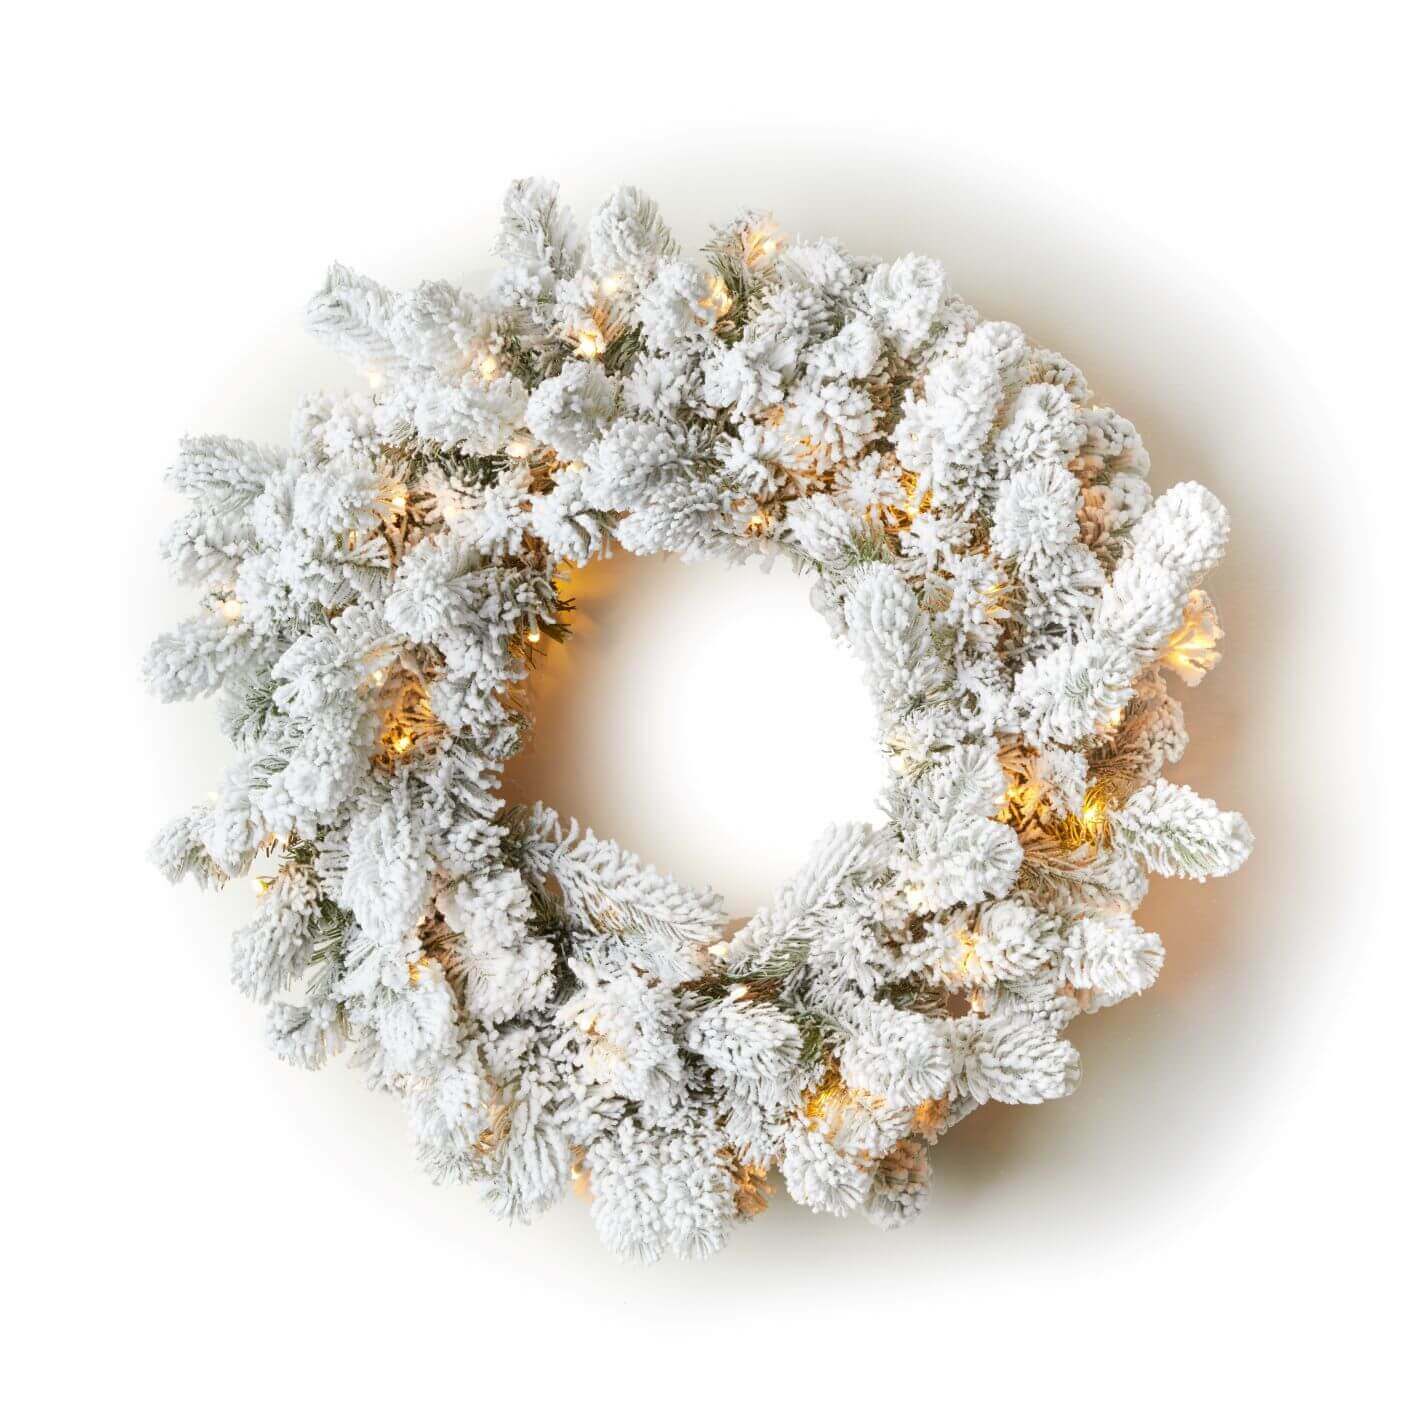 King of Christmas 24" King Flock® Wreath with Warm White LED Lights (Battery Operated)